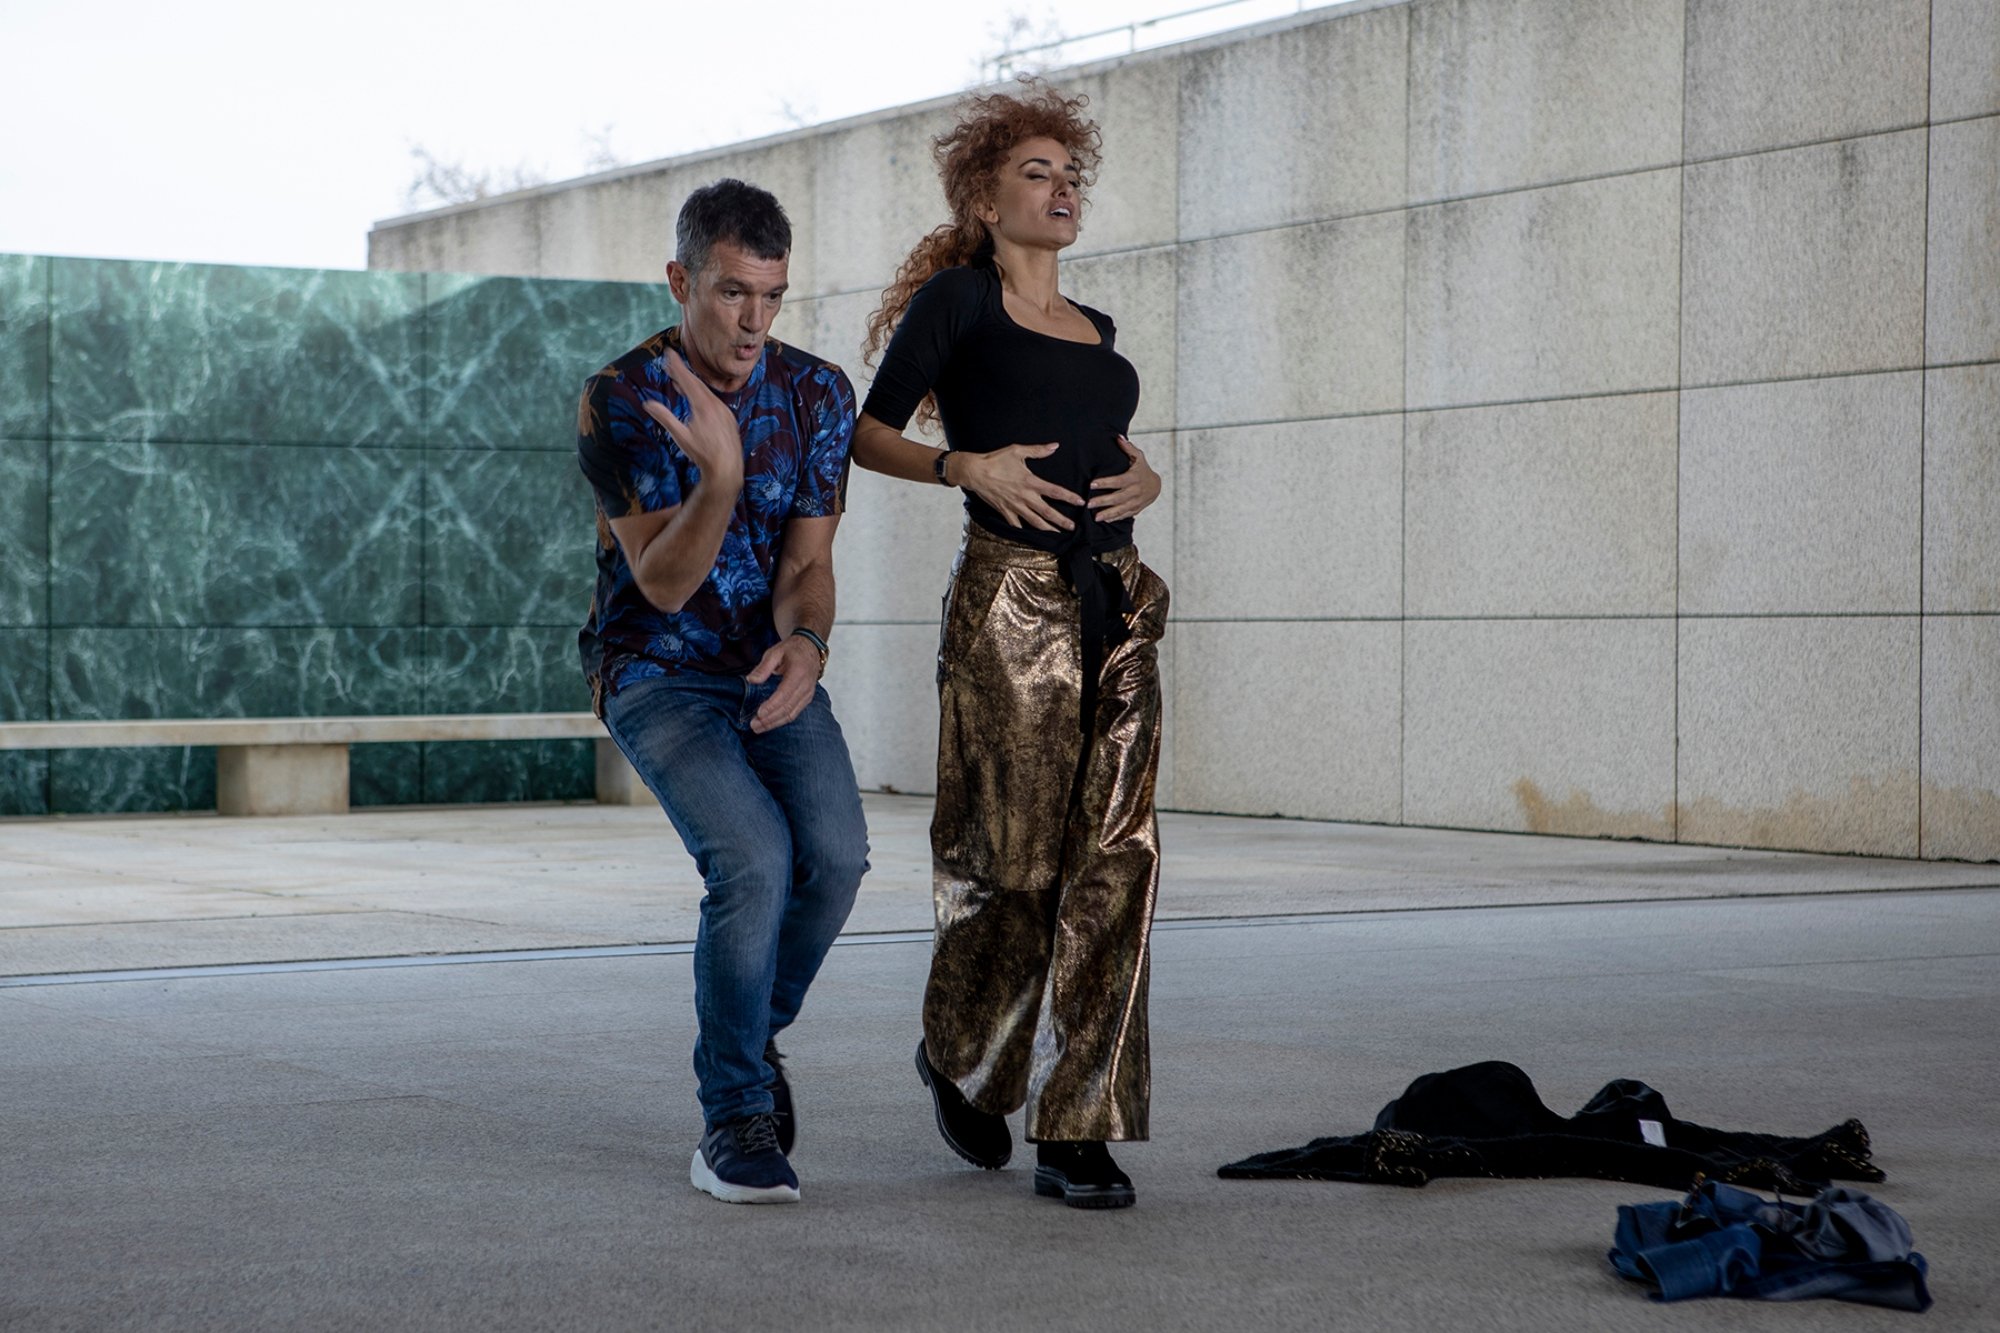 'Official Competition' Antonio Banderas as Félix Rivero and Penélope Cruz as Lola Cuevas dancing next to each other outside of a large building